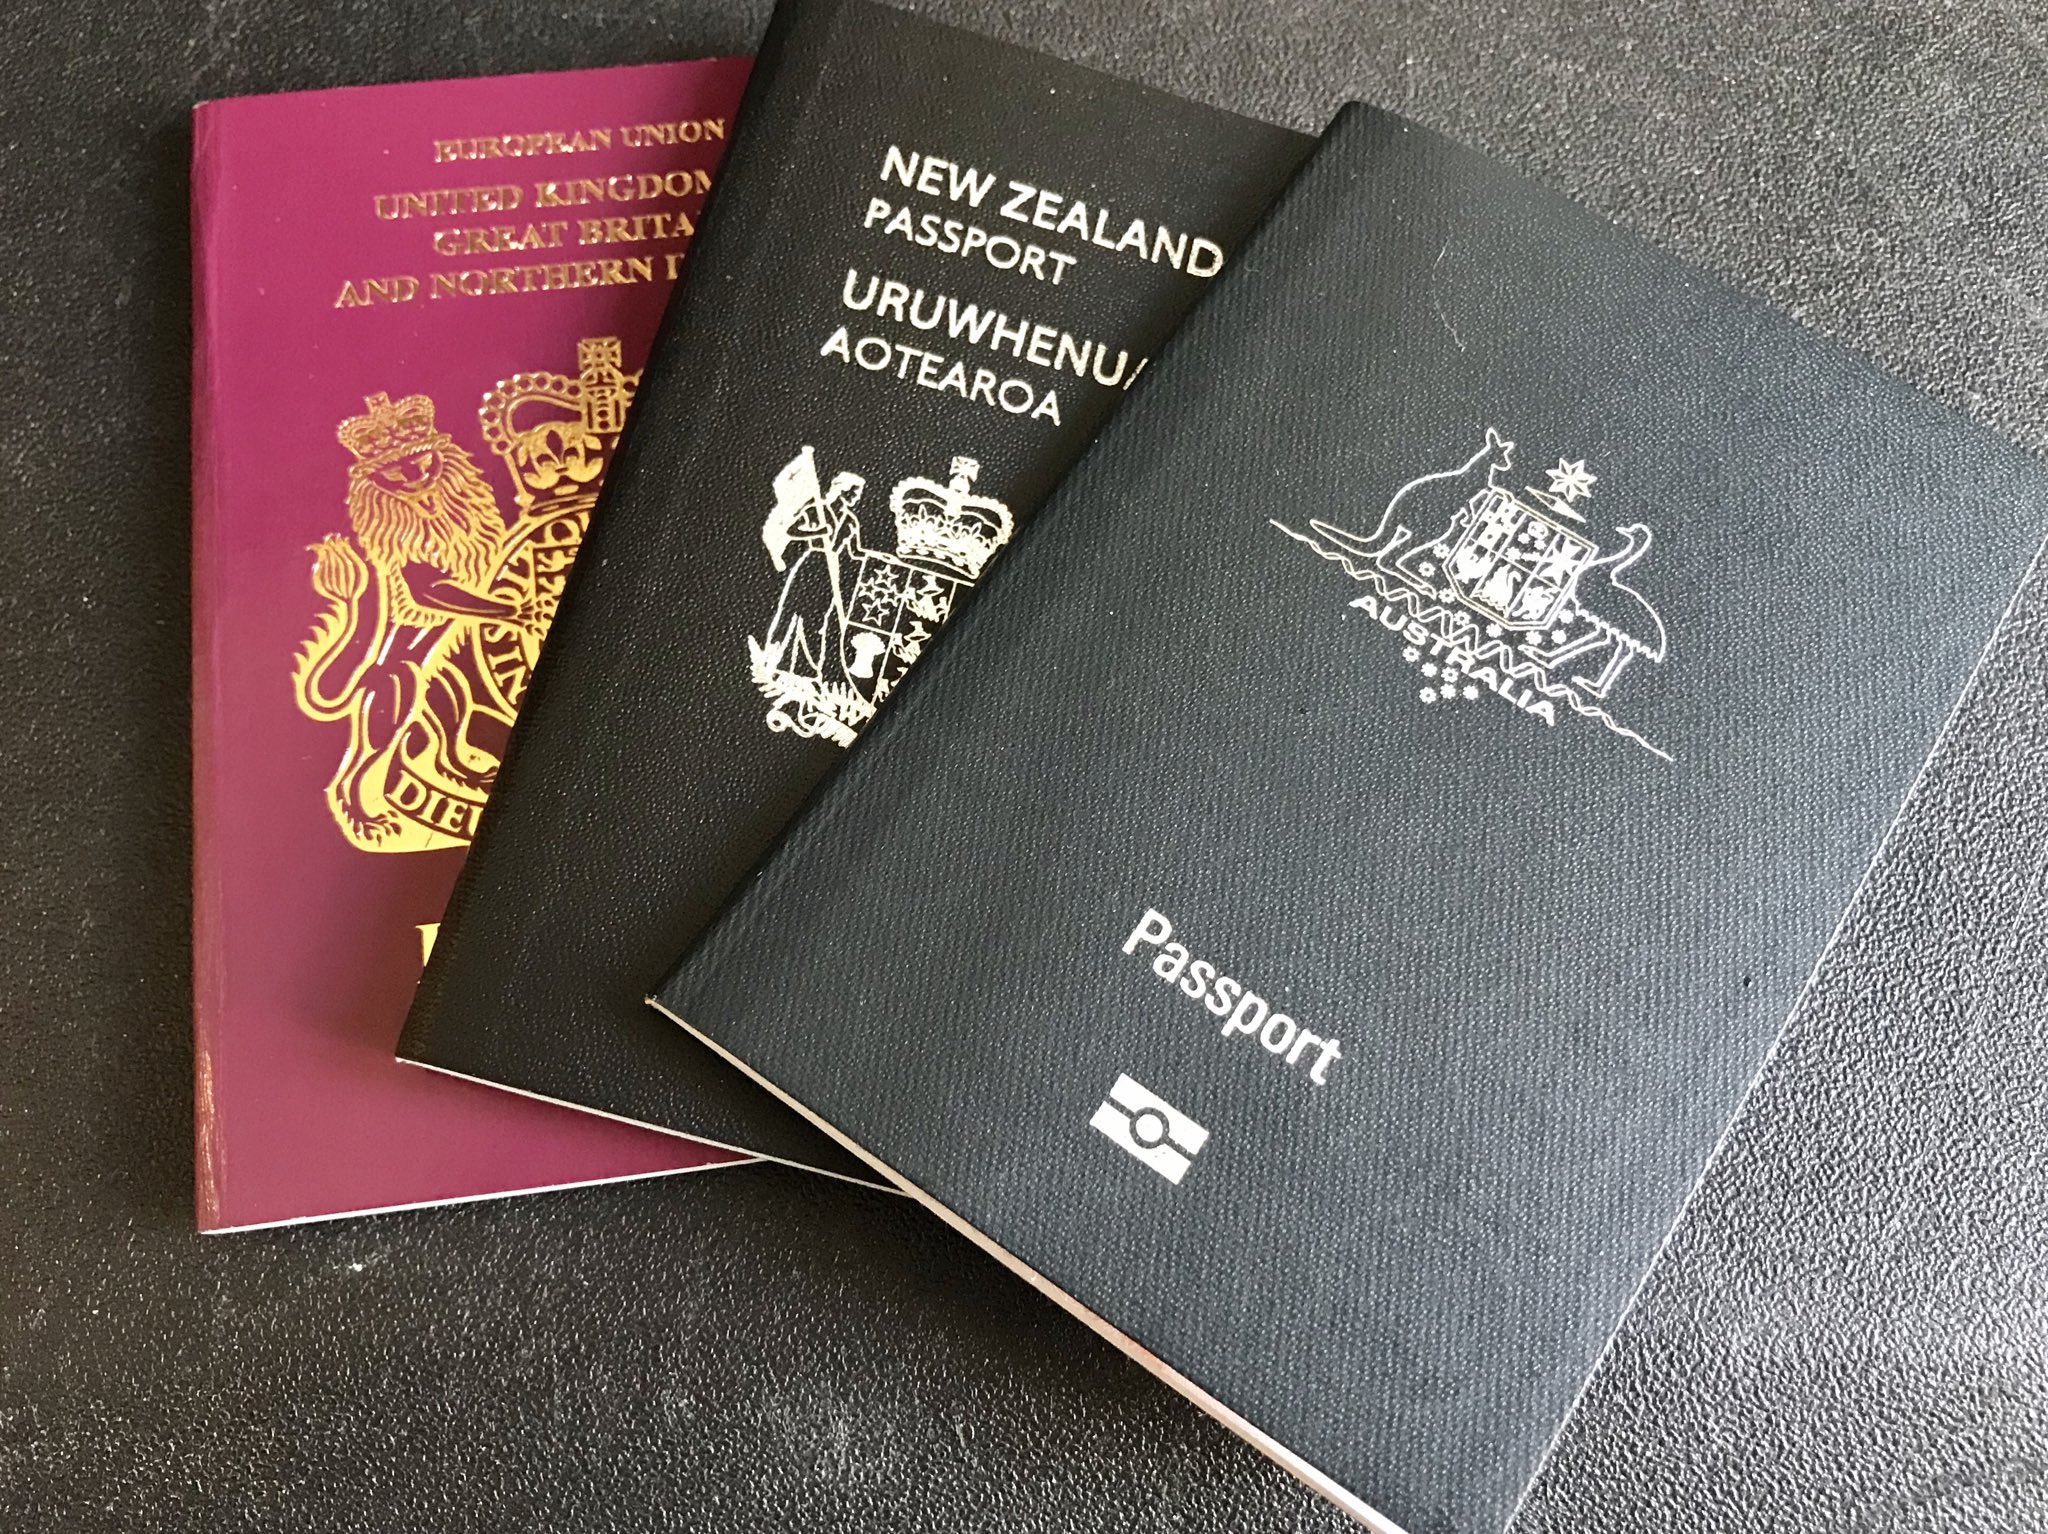 Graham Mack on Twitter: "Just getting all set for a big trip. Do I take my Australian  passport or my New Zealand passport? I'll only need my British passport if  I want